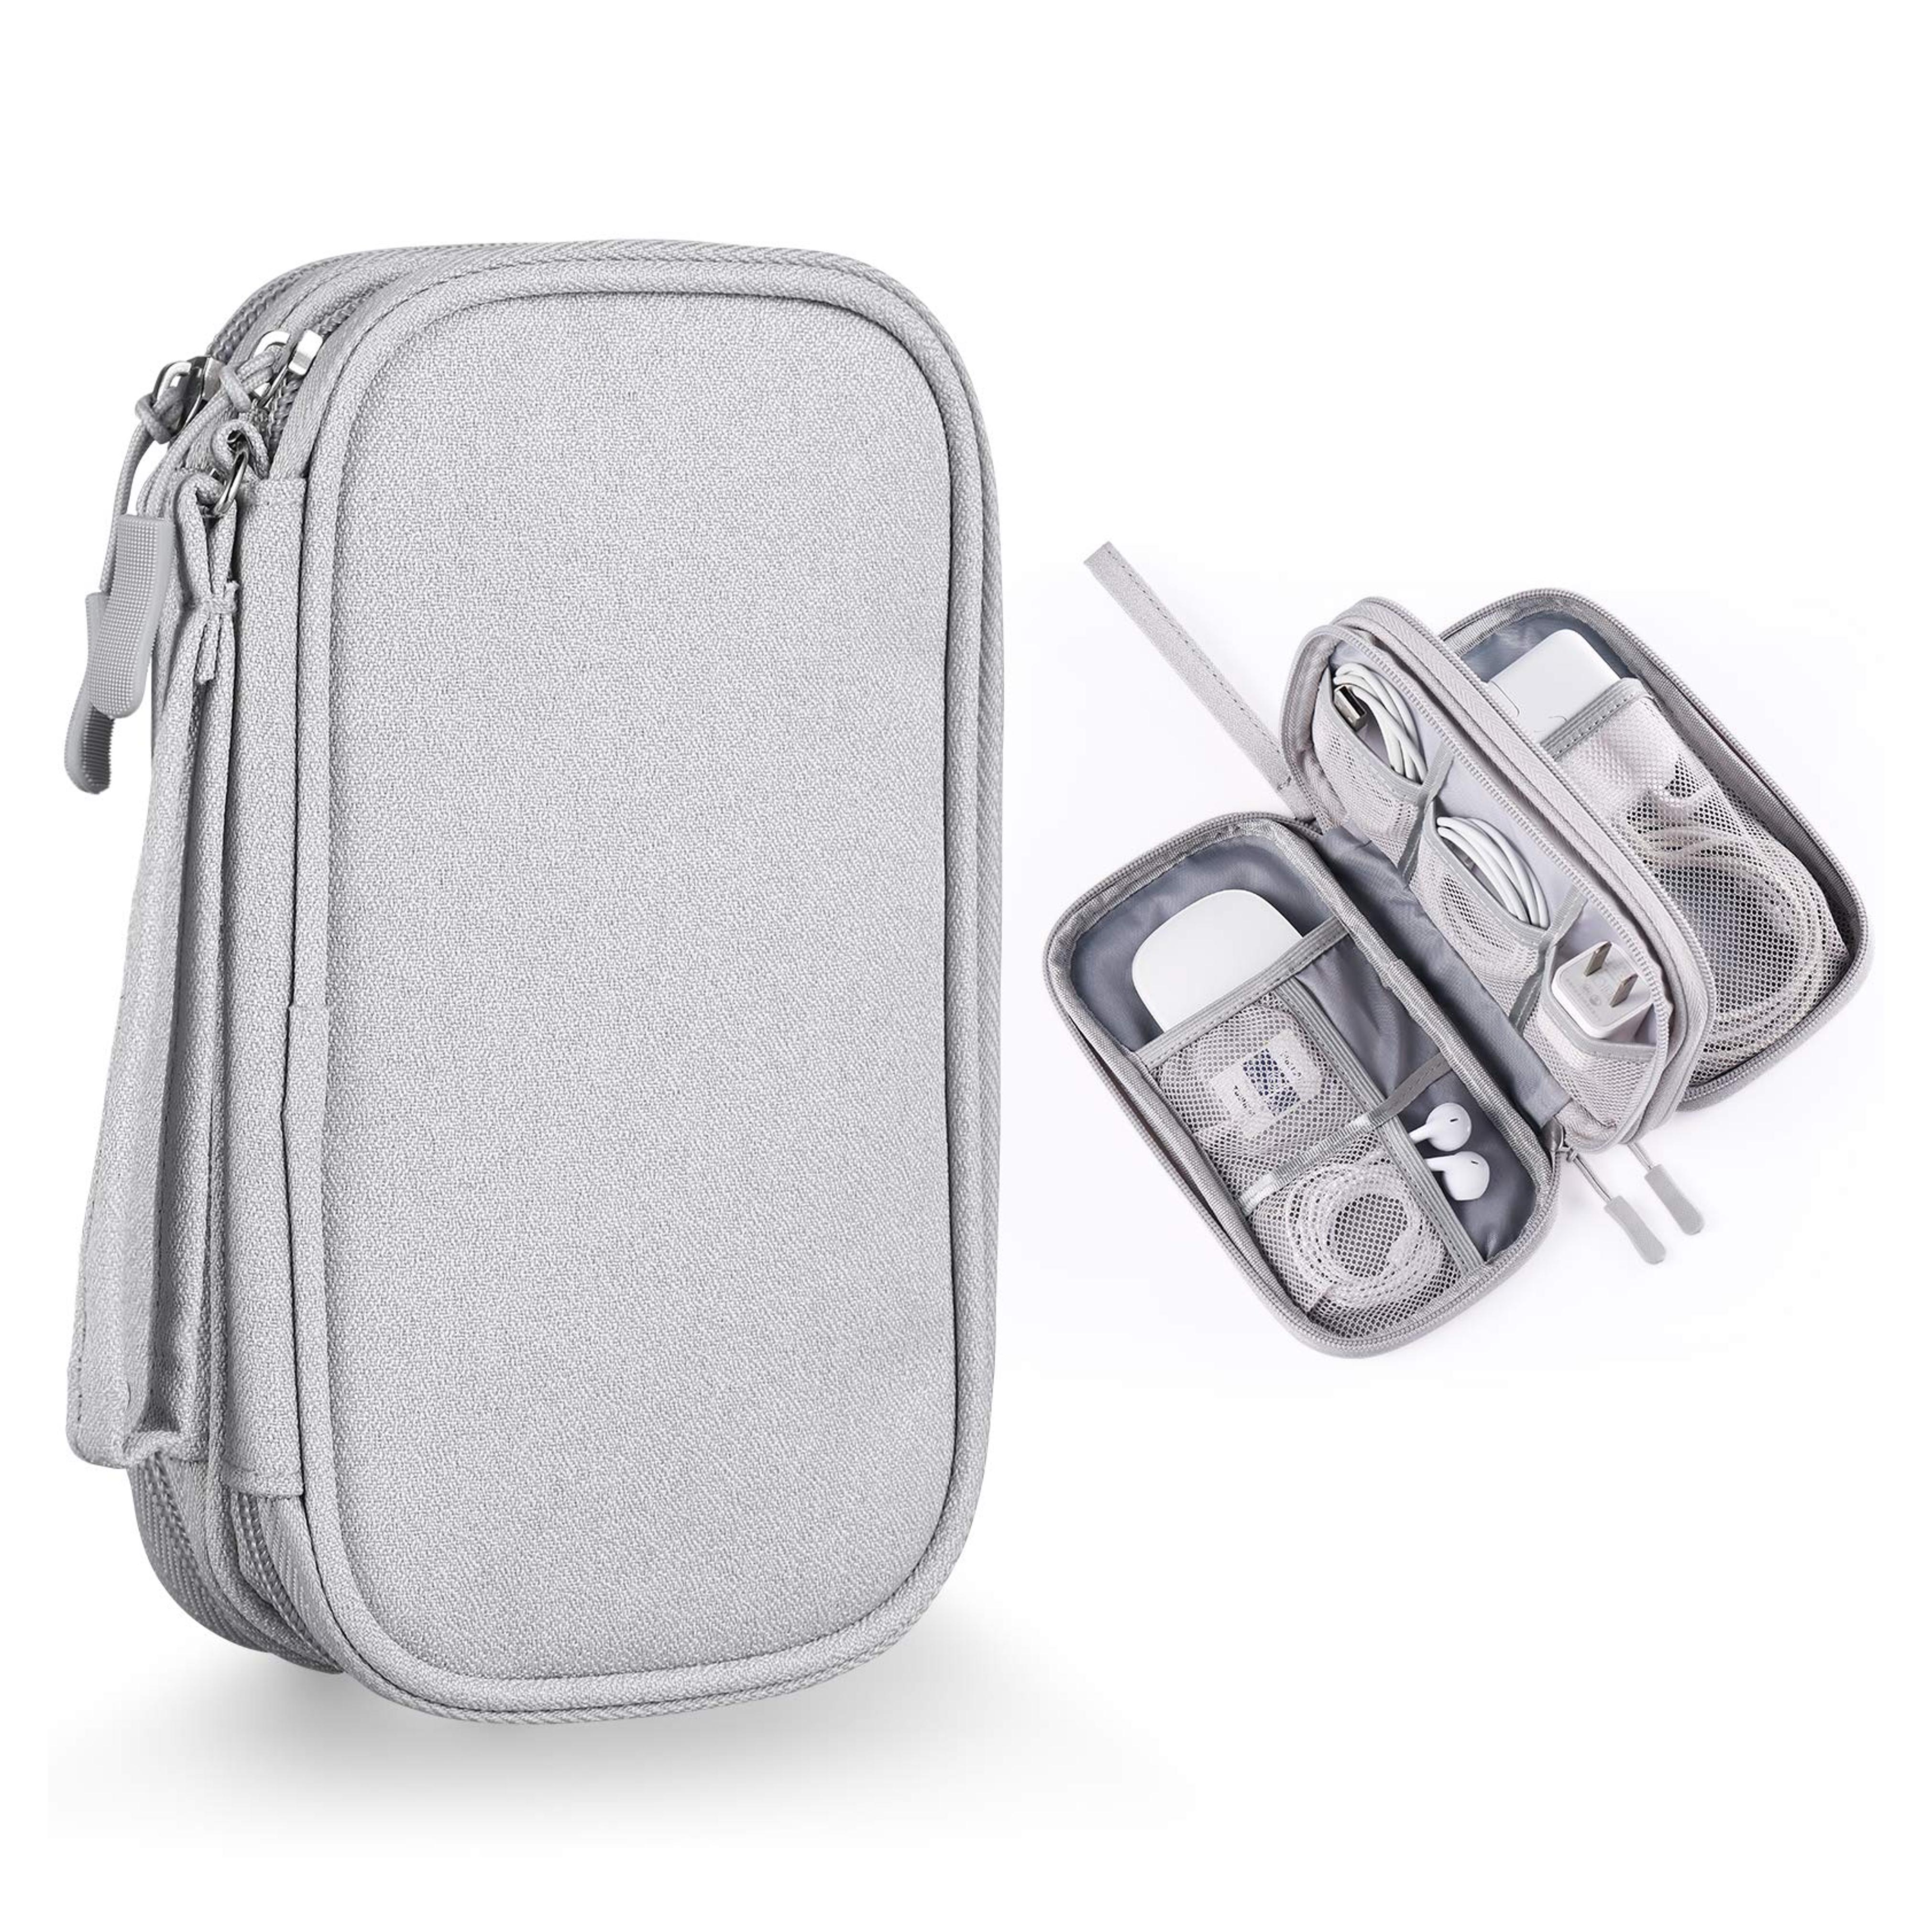 Bevegekos Cable and Charger Organizer Bag, Travel Case Pouch for Small Electronics & Accessories (Small, Light Grey)